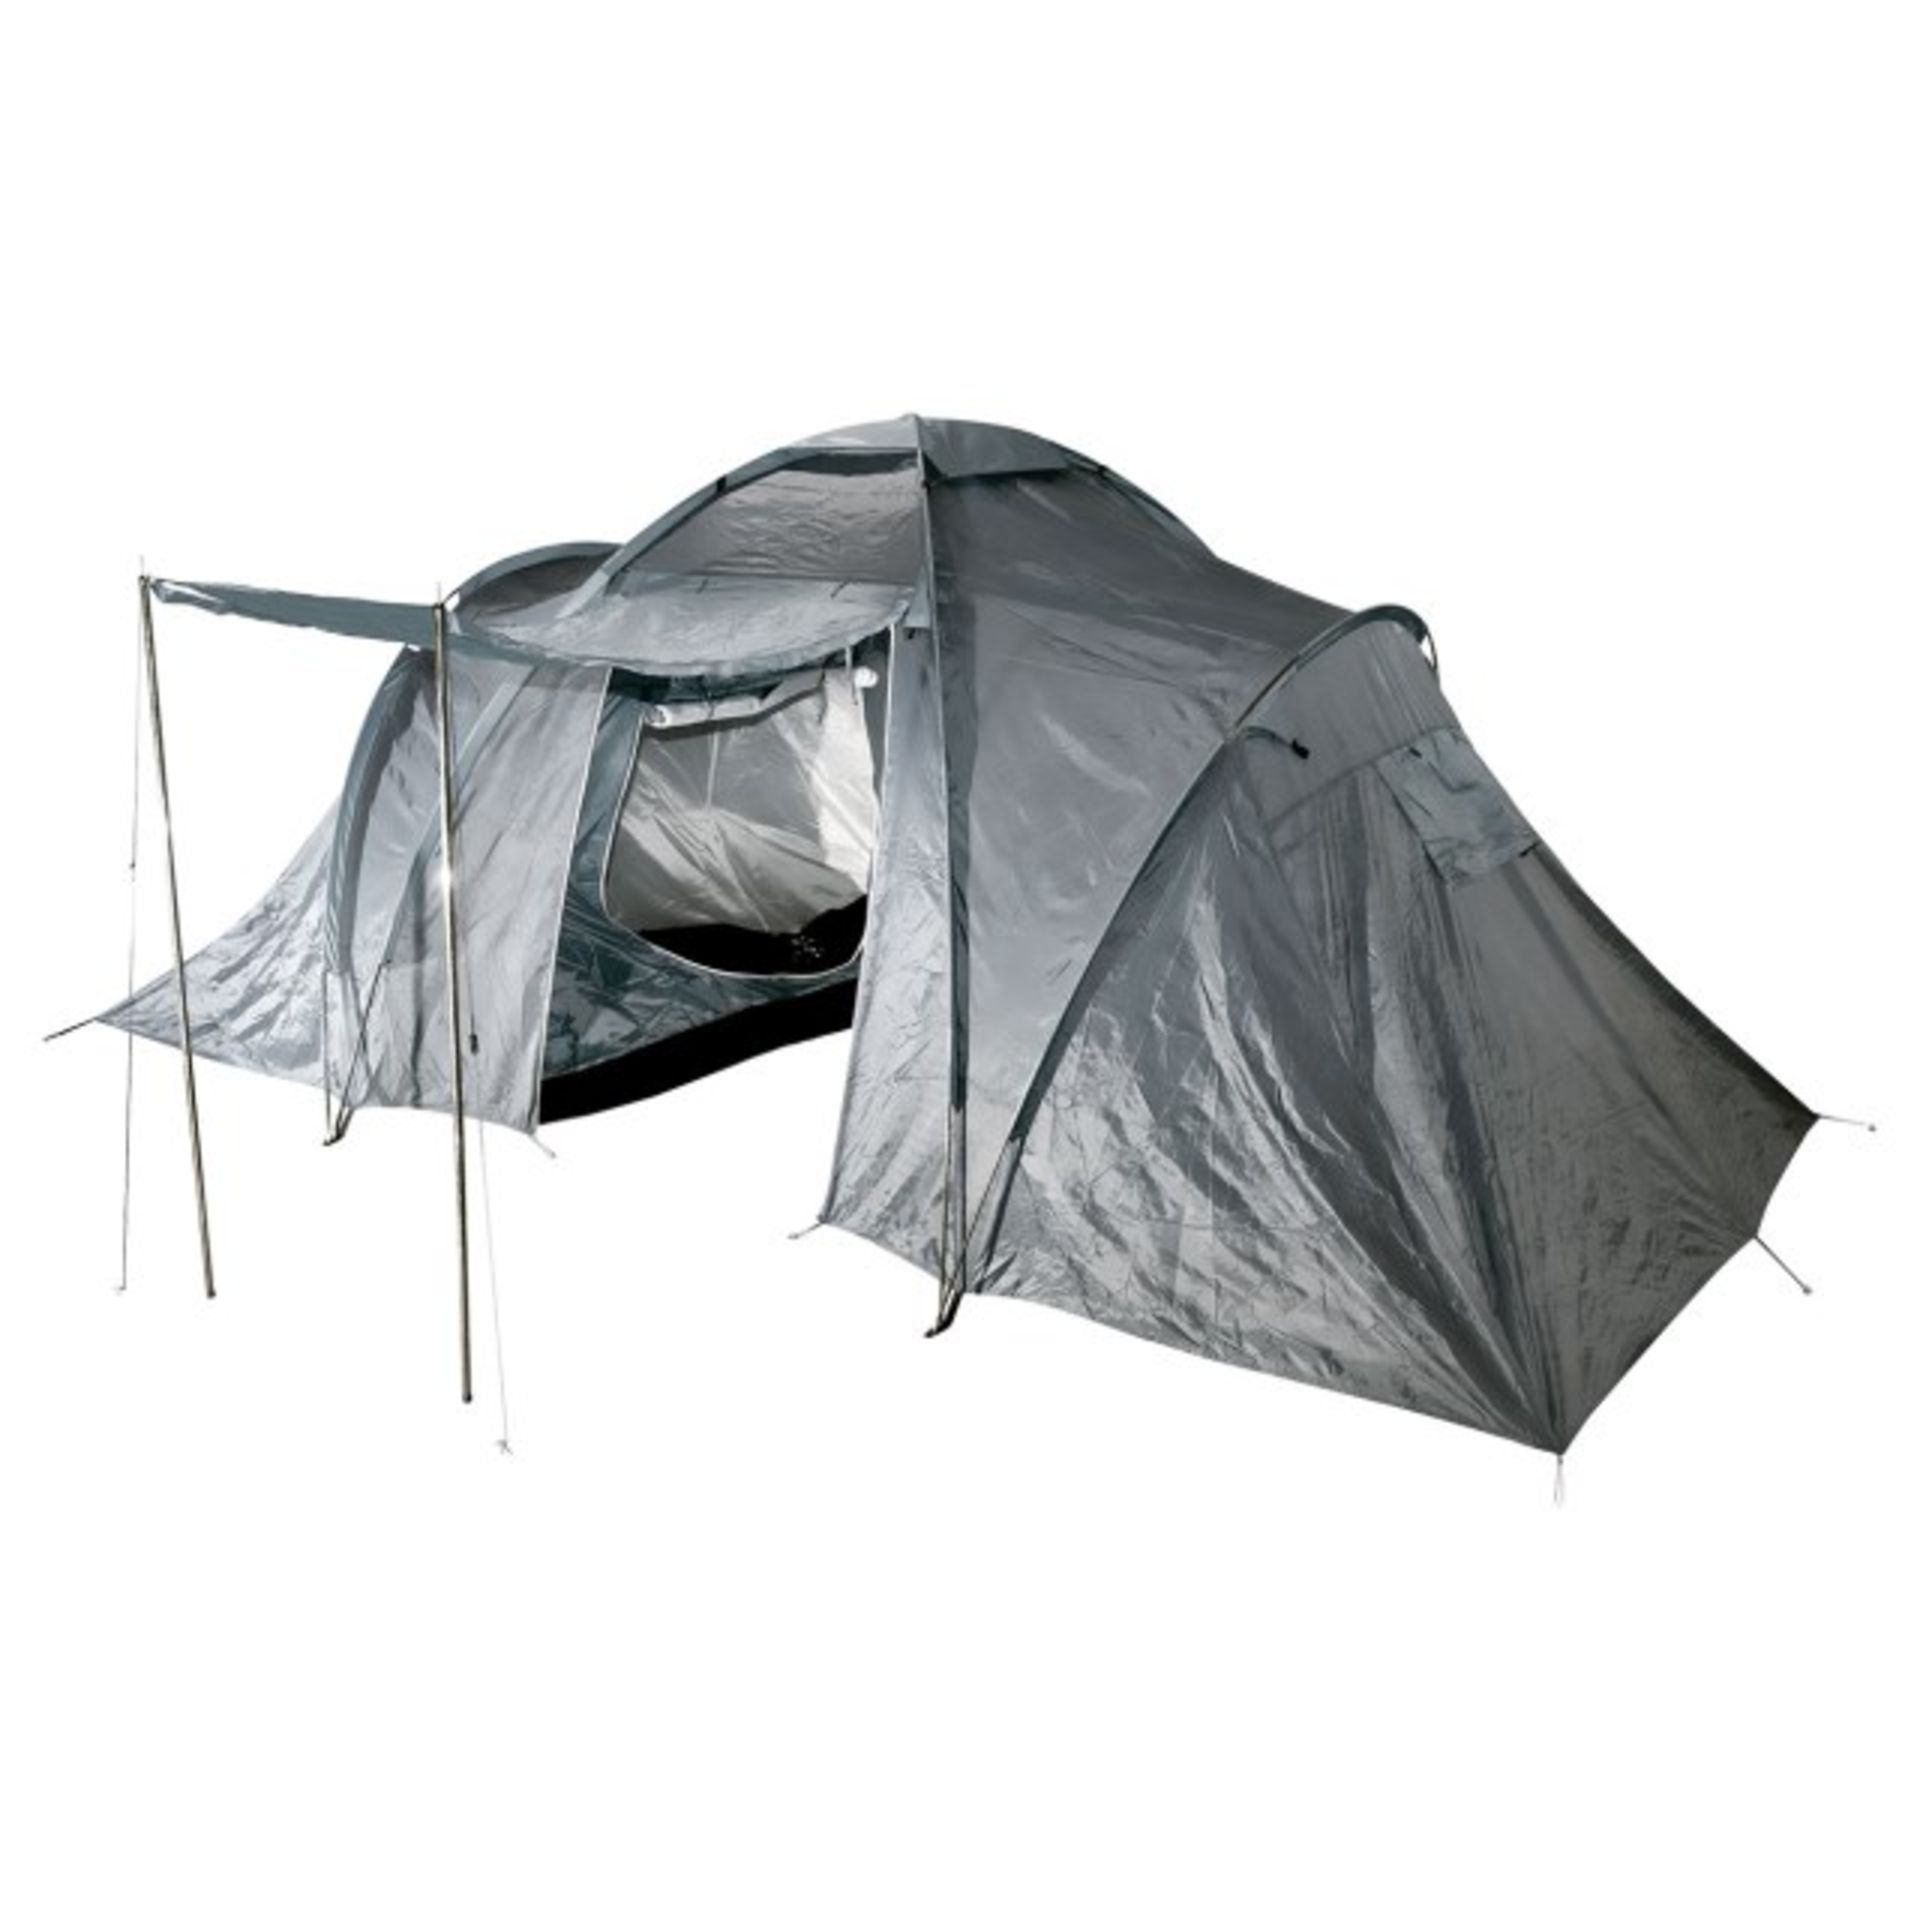 V Brand New Redcliffs Longwood Four Man Three Room Family Tent With Canopy - Colour May Vary - Image 3 of 3